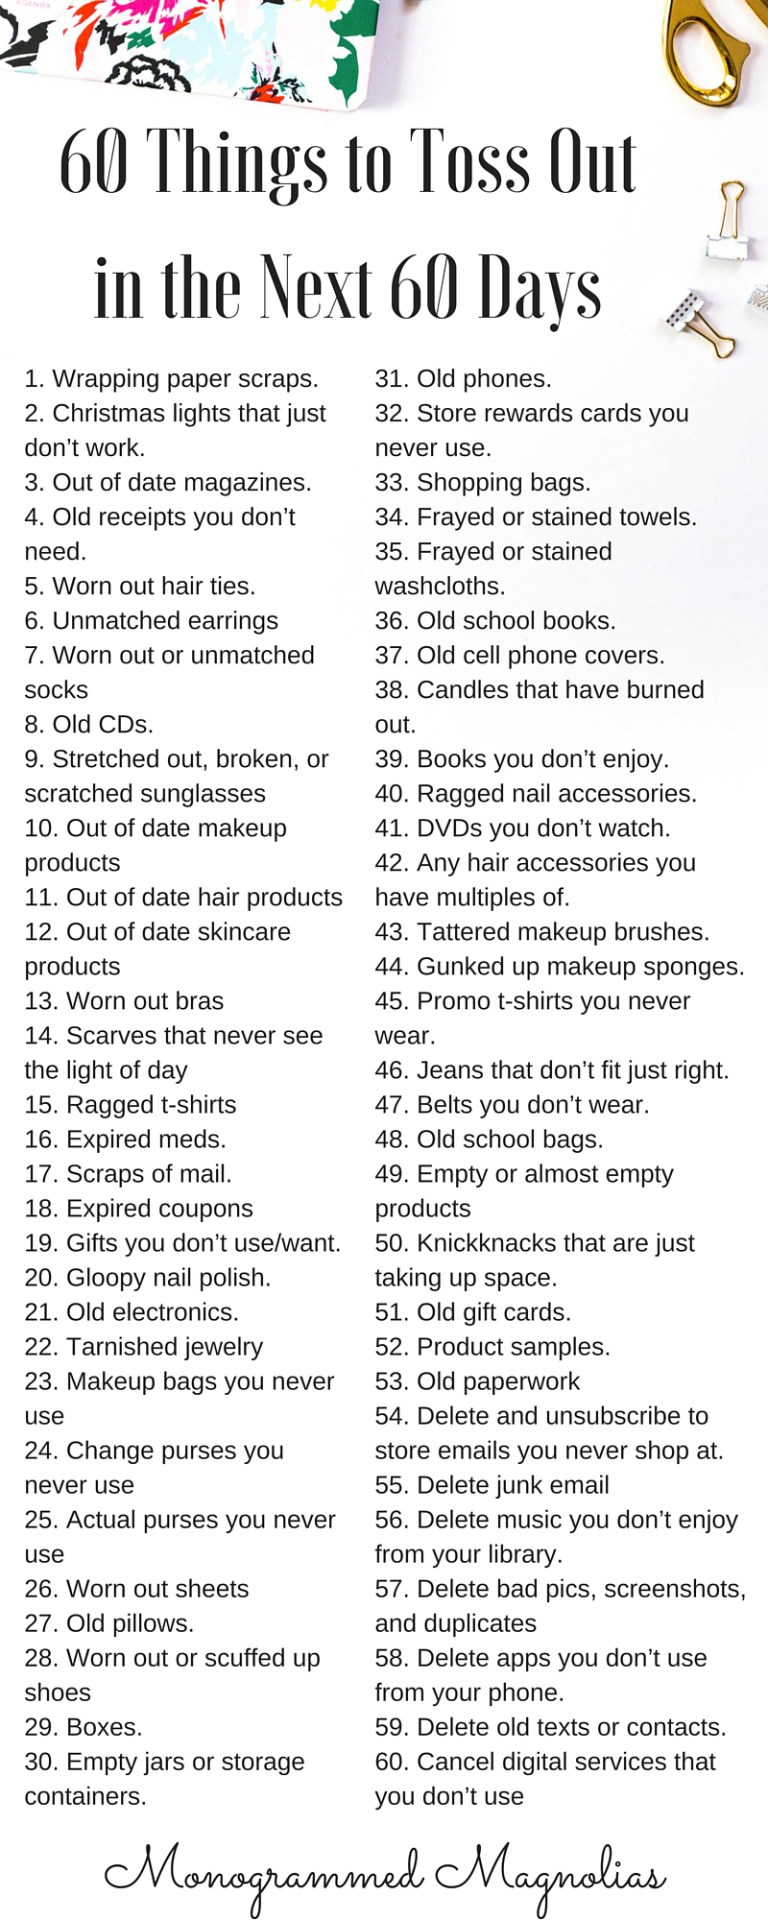 60 Things in 60 Days